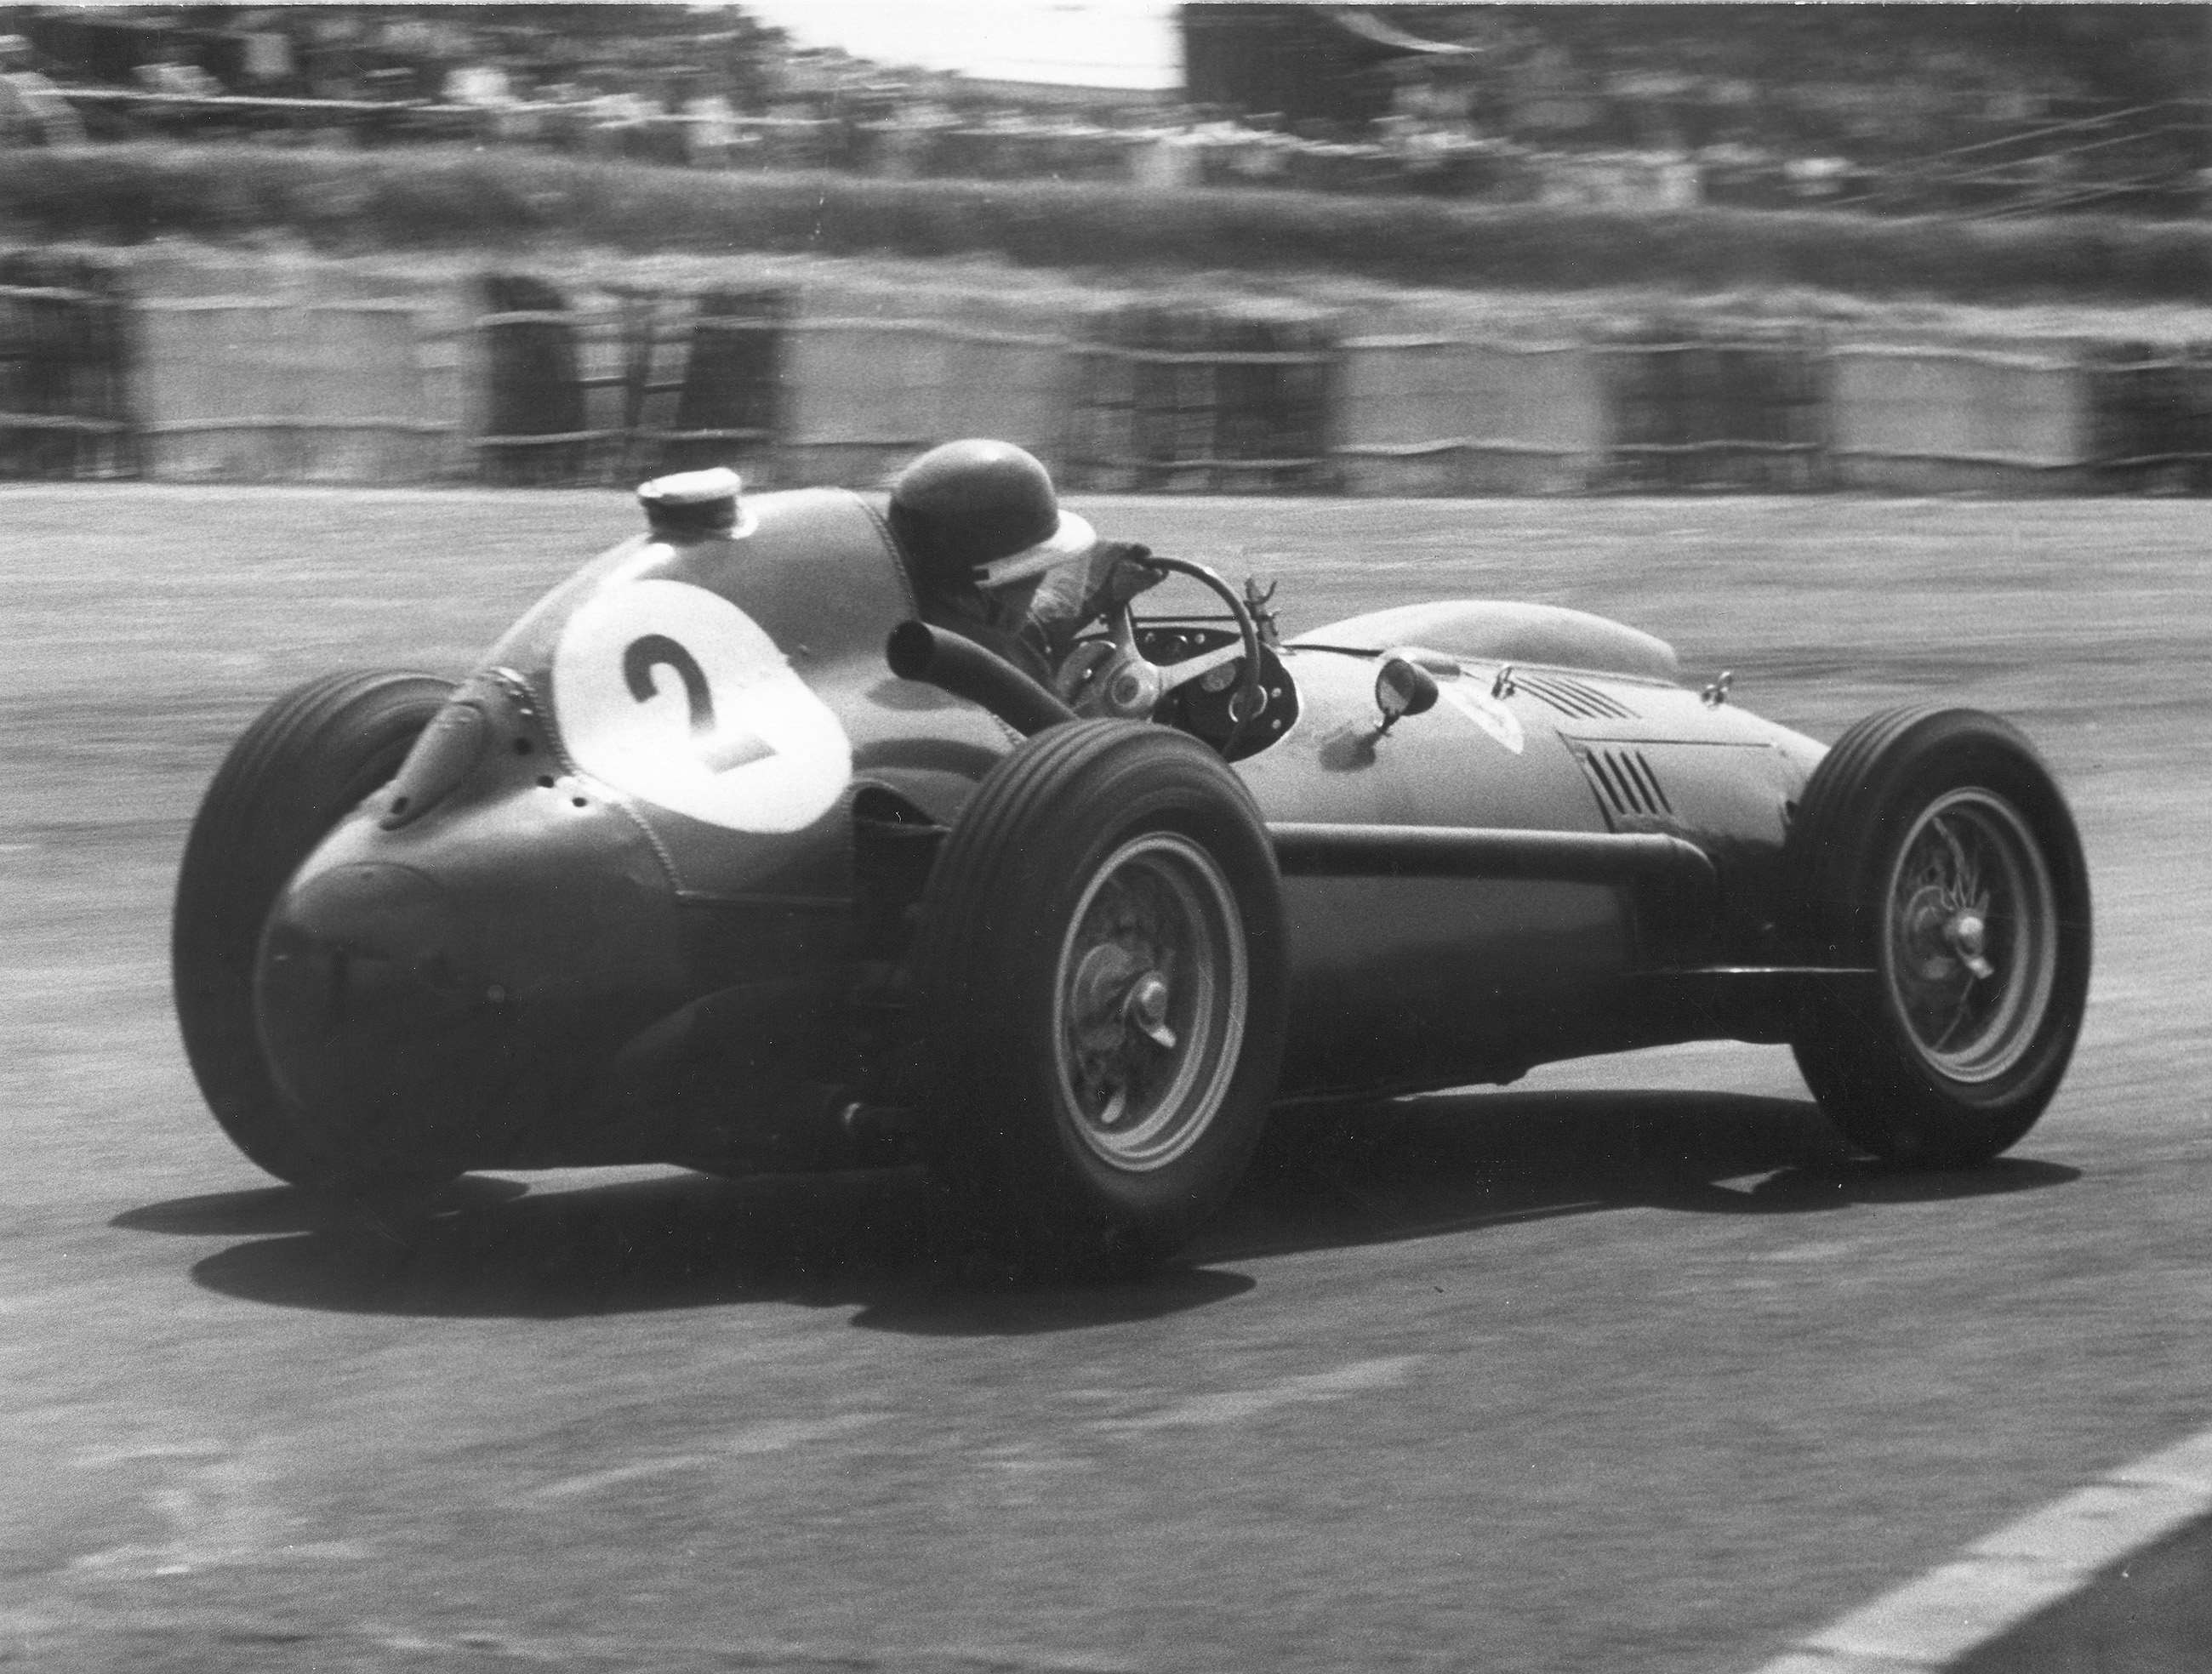 Mike Hawthorn on his way to second place behind his team-mate and great friend Peter Collins - in the 1958 British GP at Silverstone.  The car is the works Ferrari Dino 246 with 2.4-litre 4-cam V6 engine.